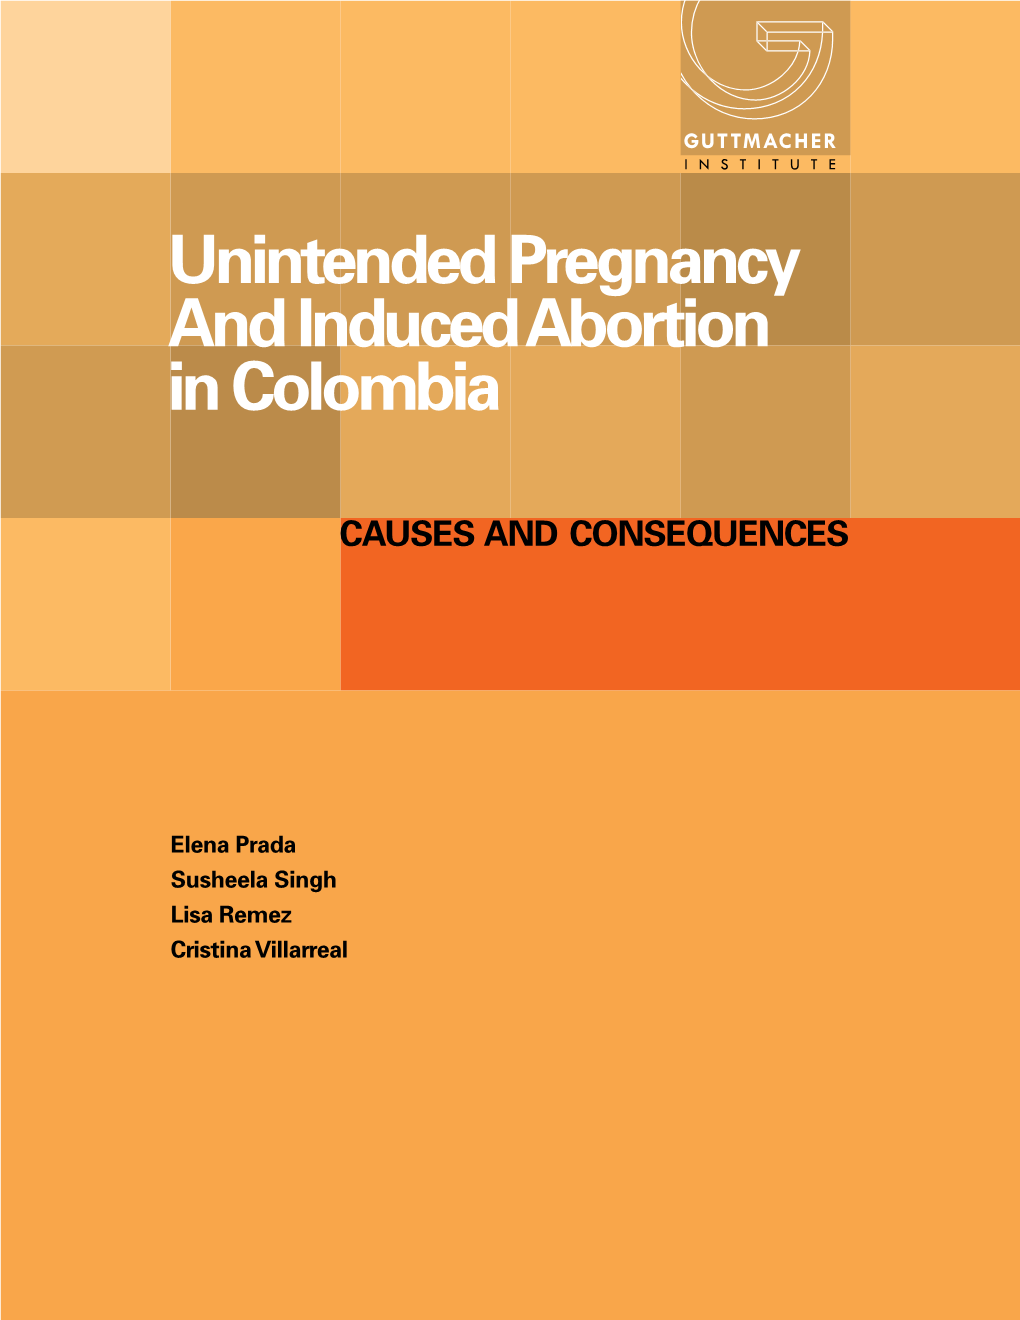 Unintended Pregnancy and Induced Abortion in Colombia